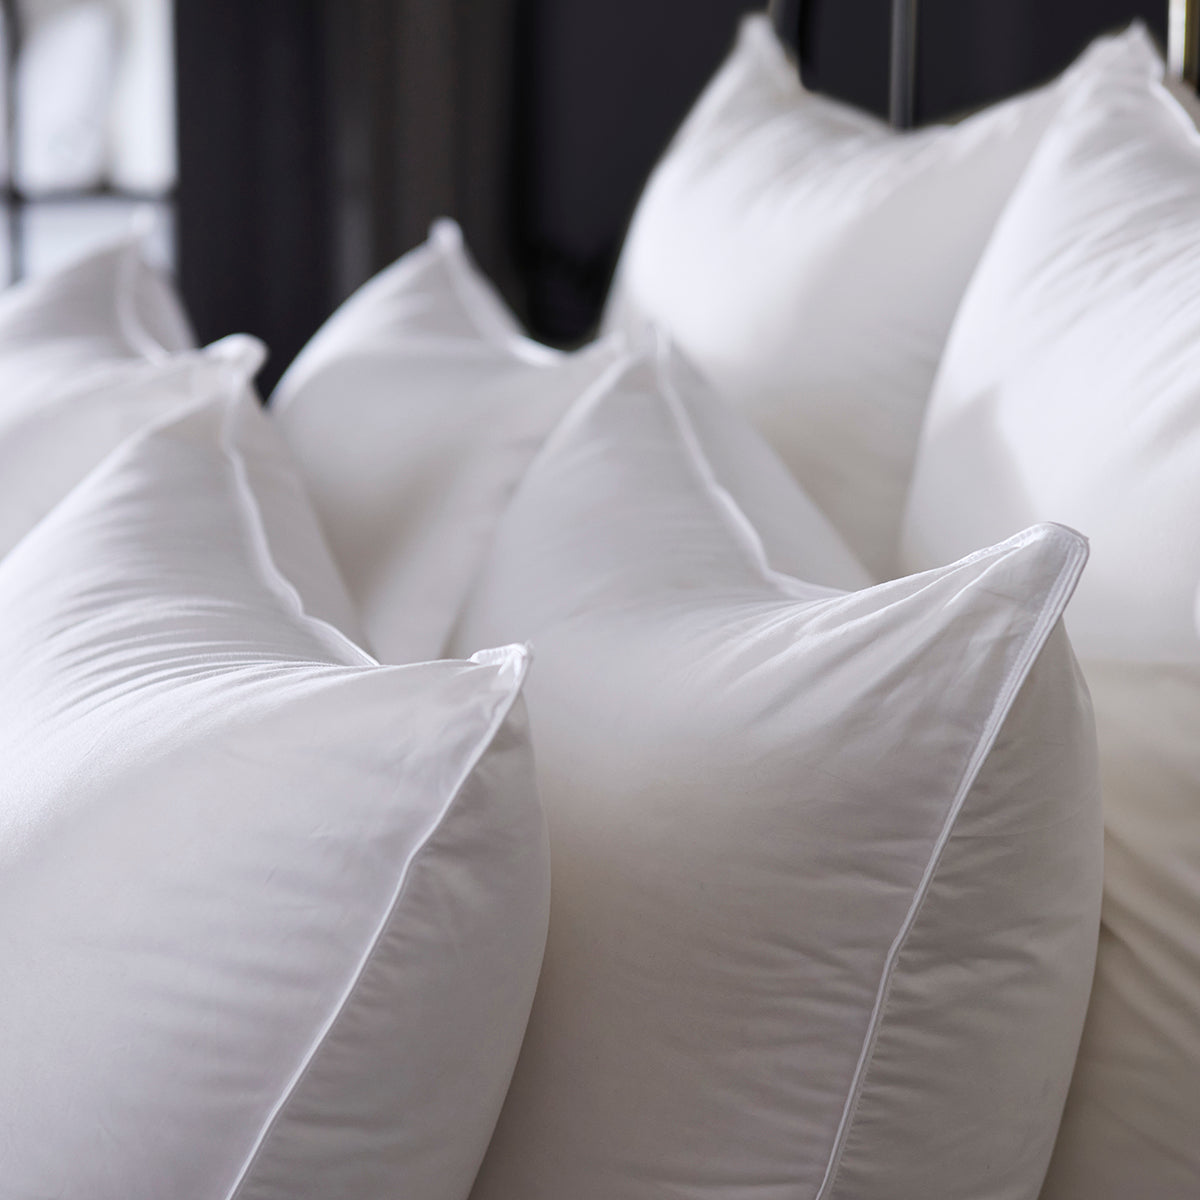 Image of thick, white pillows stacked upright on a bed